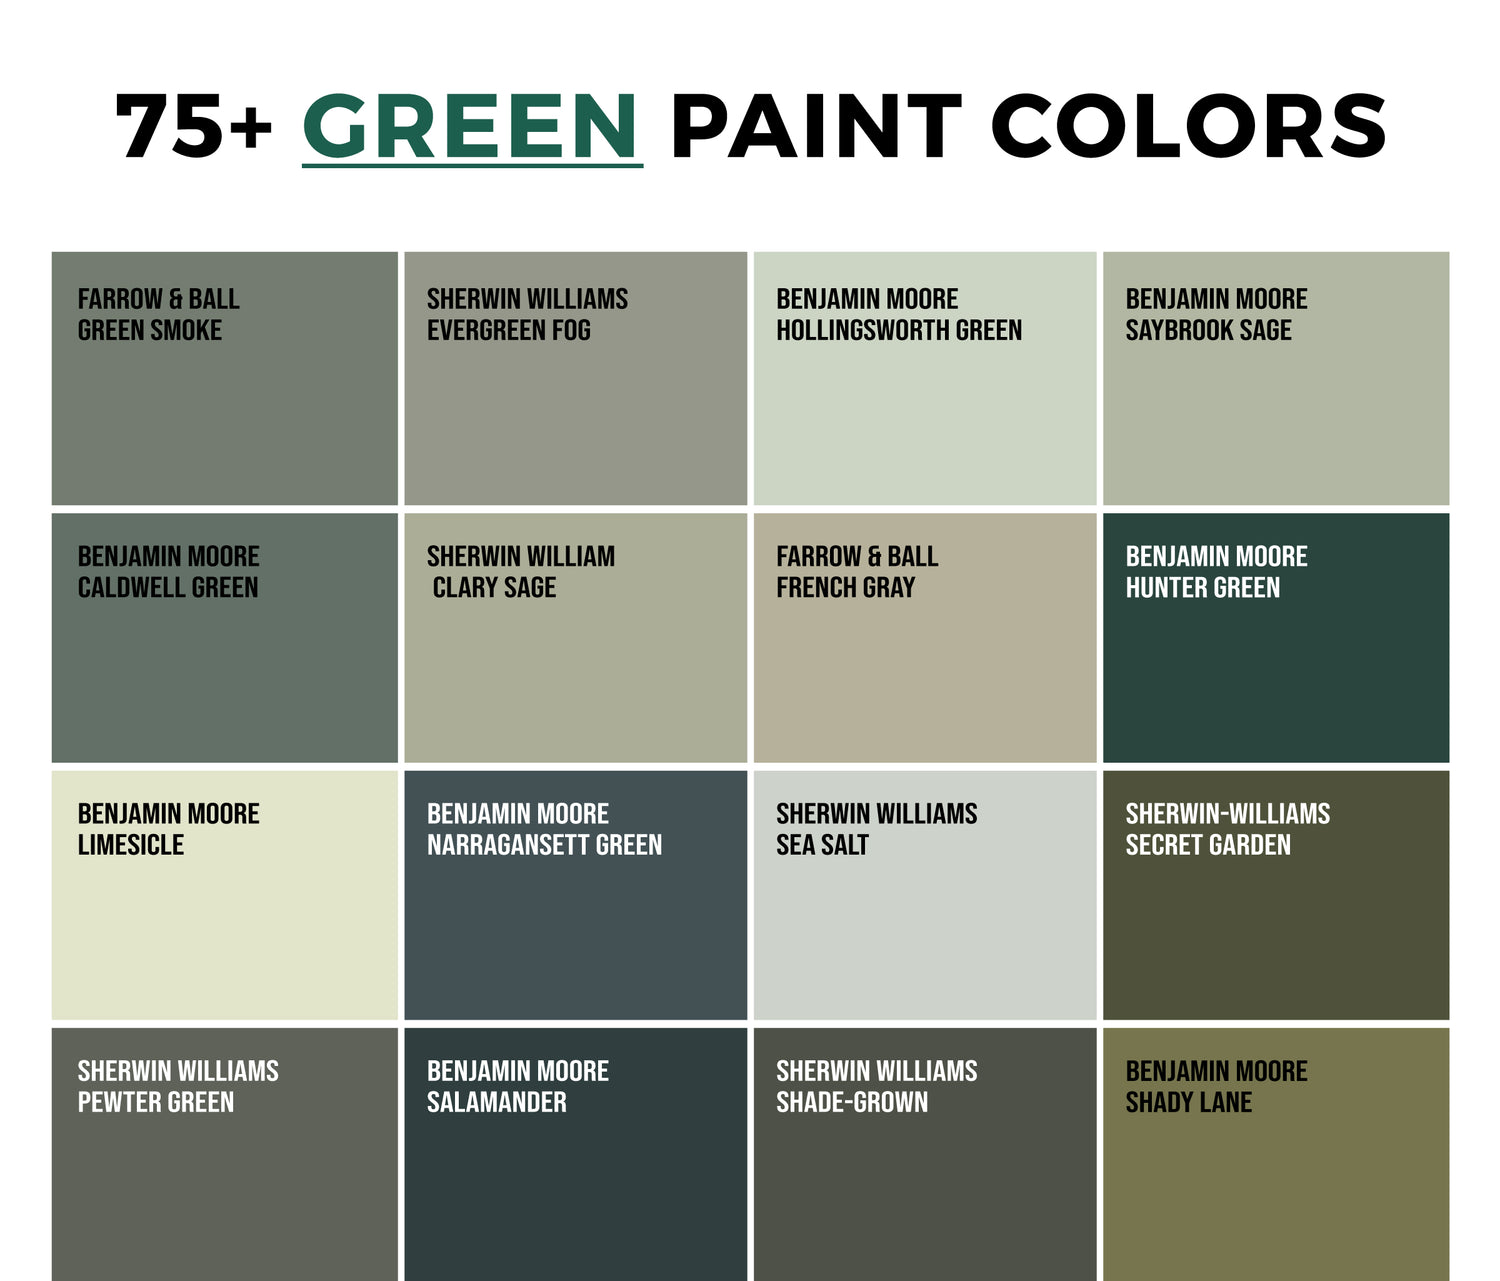 Shades Of Green Paint Colors Chart With Names And Brands Sherwin Williams Benjamin Moore ?v=1694763611&width=1500